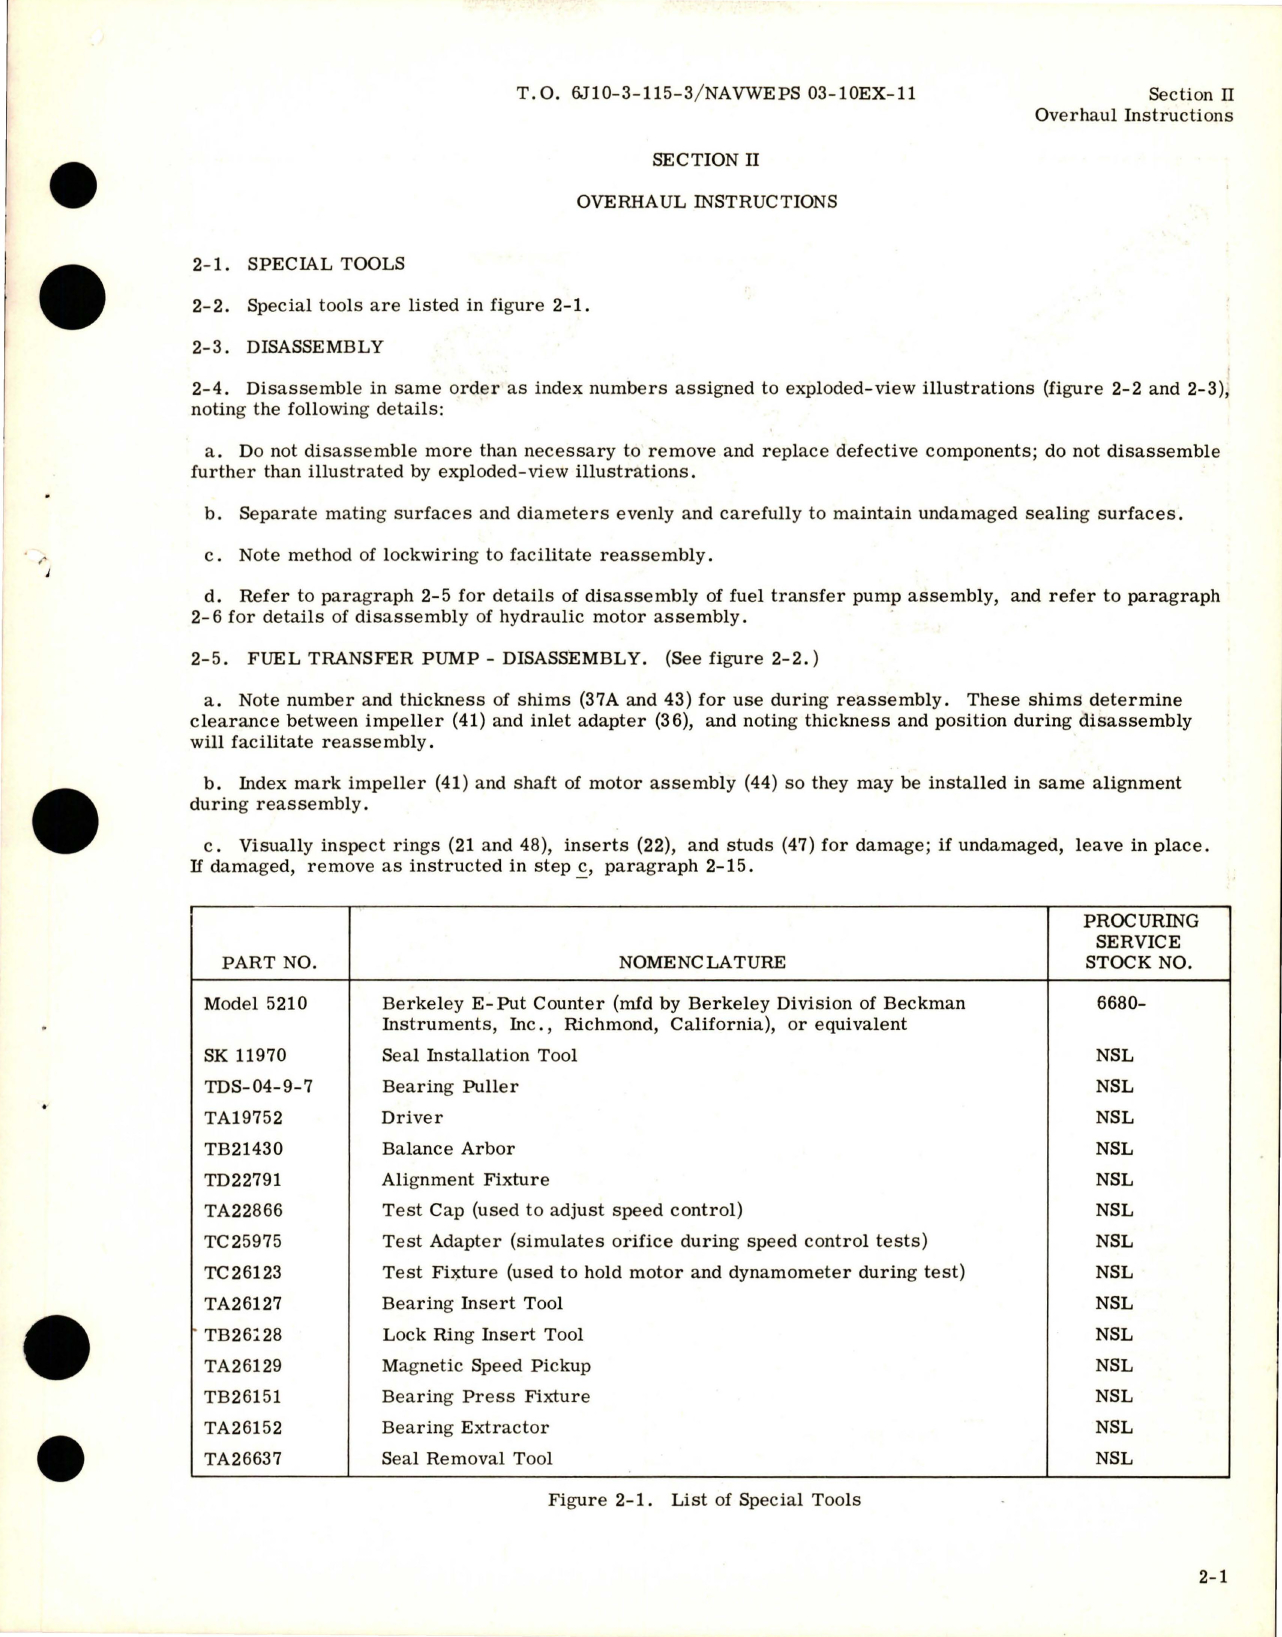 Sample page 7 from AirCorps Library document: Overhaul for Fuel Transfer Pump Assembly